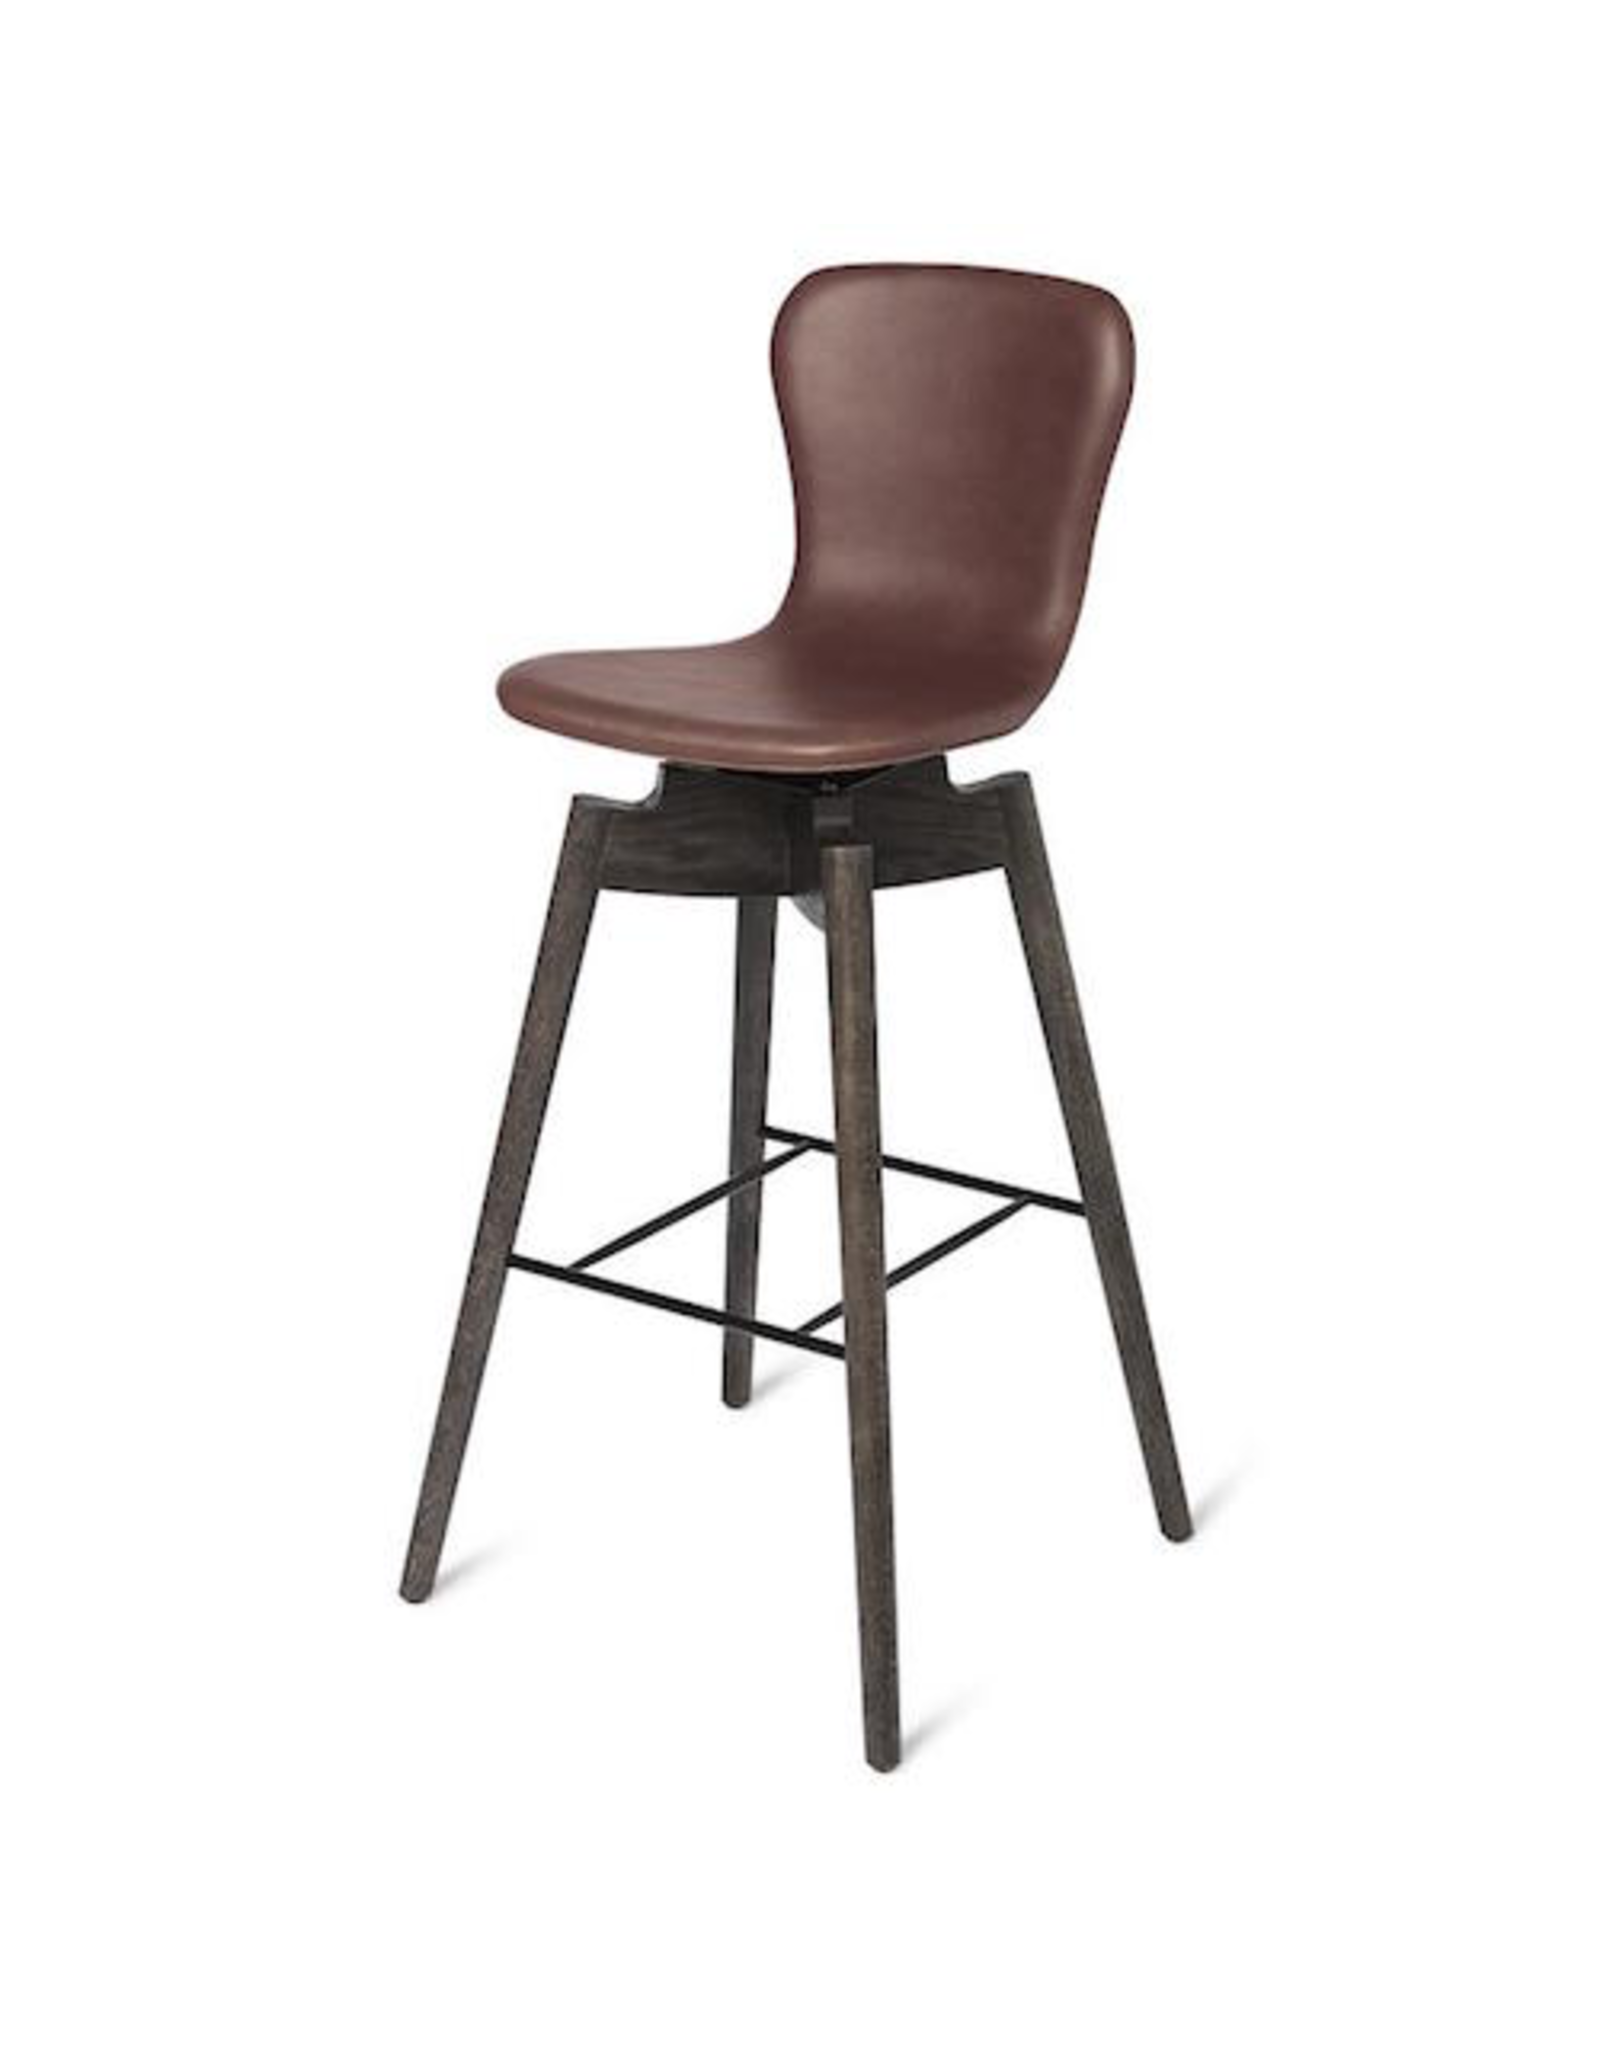 S Barstool By Mater Manks Hong, Cognac Leather Bar Stool